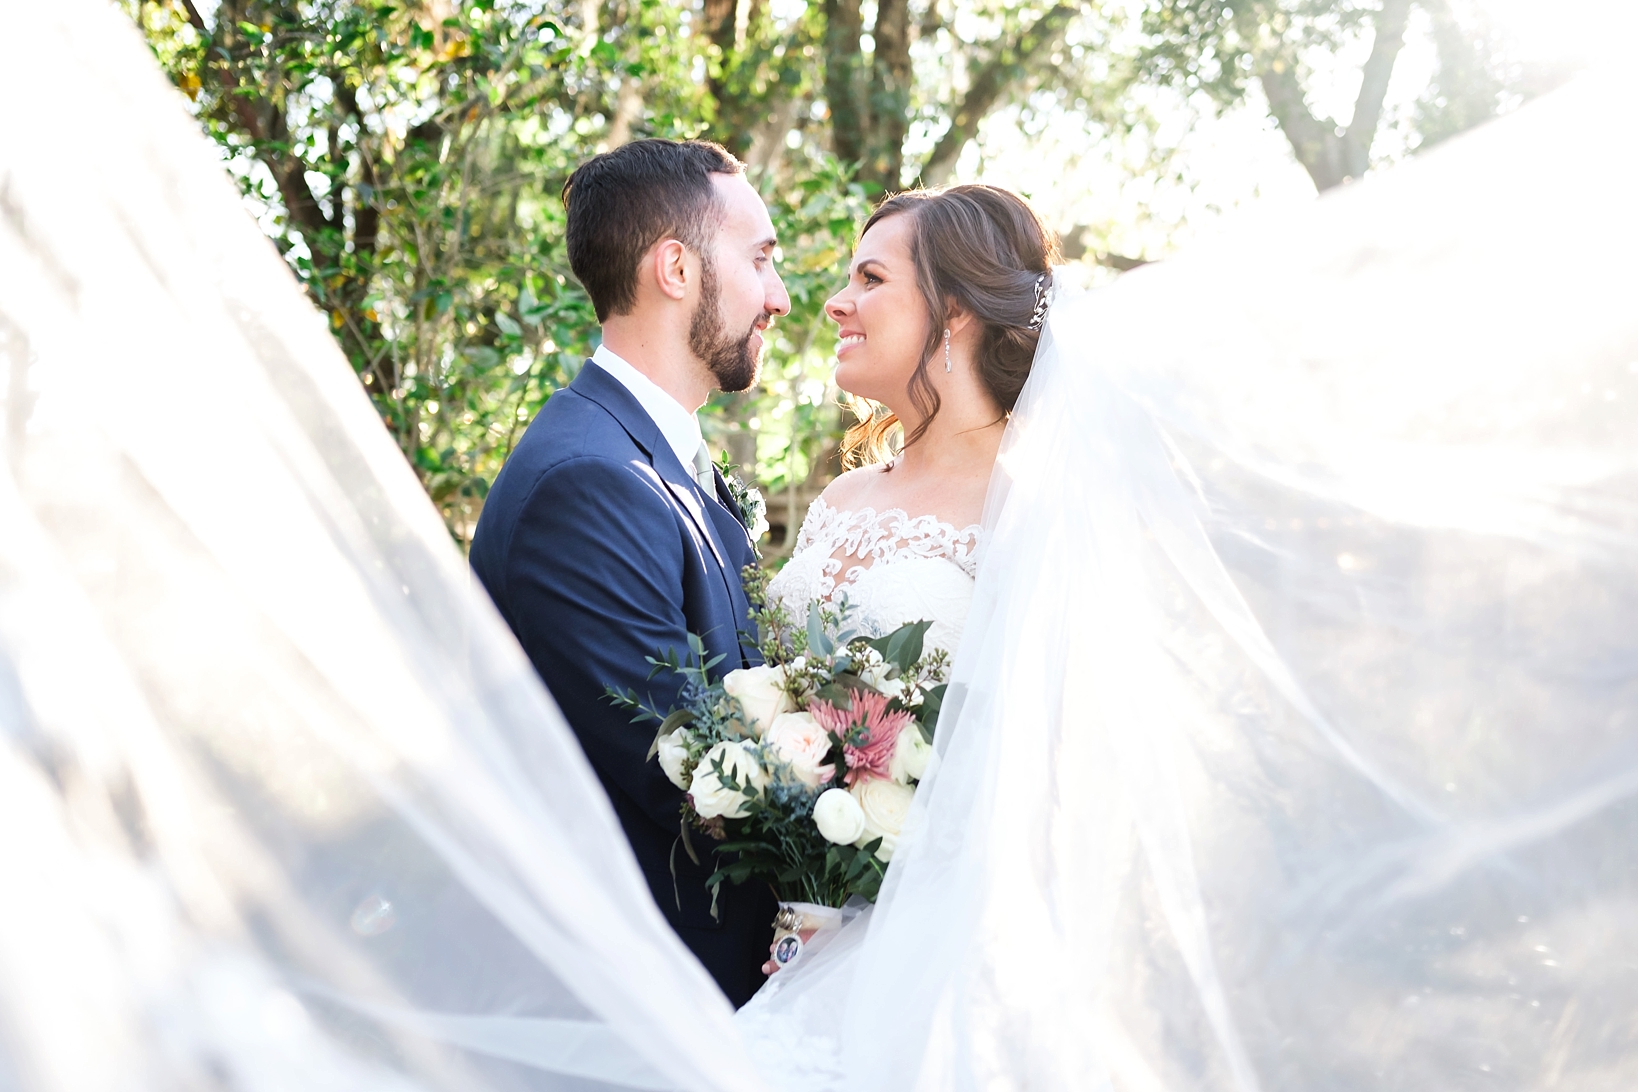 Bride and Groom smile at each other as the bridal veil blows in the wind